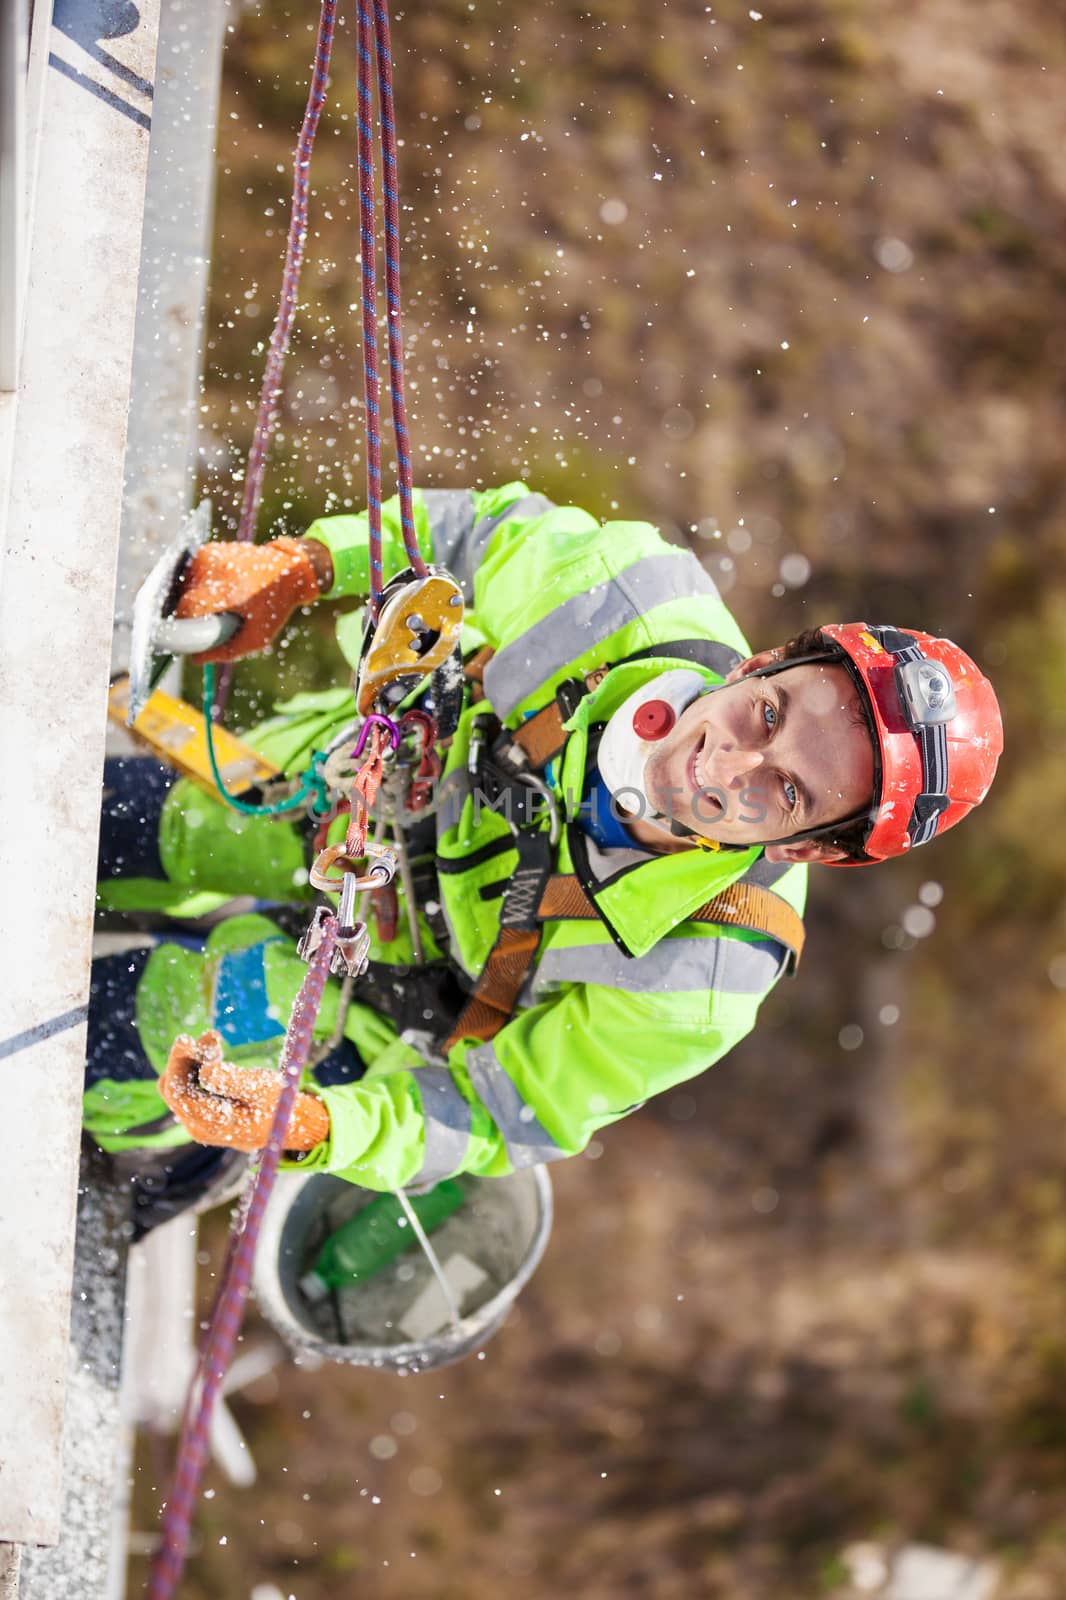 Industrial climber on a building during winterization works